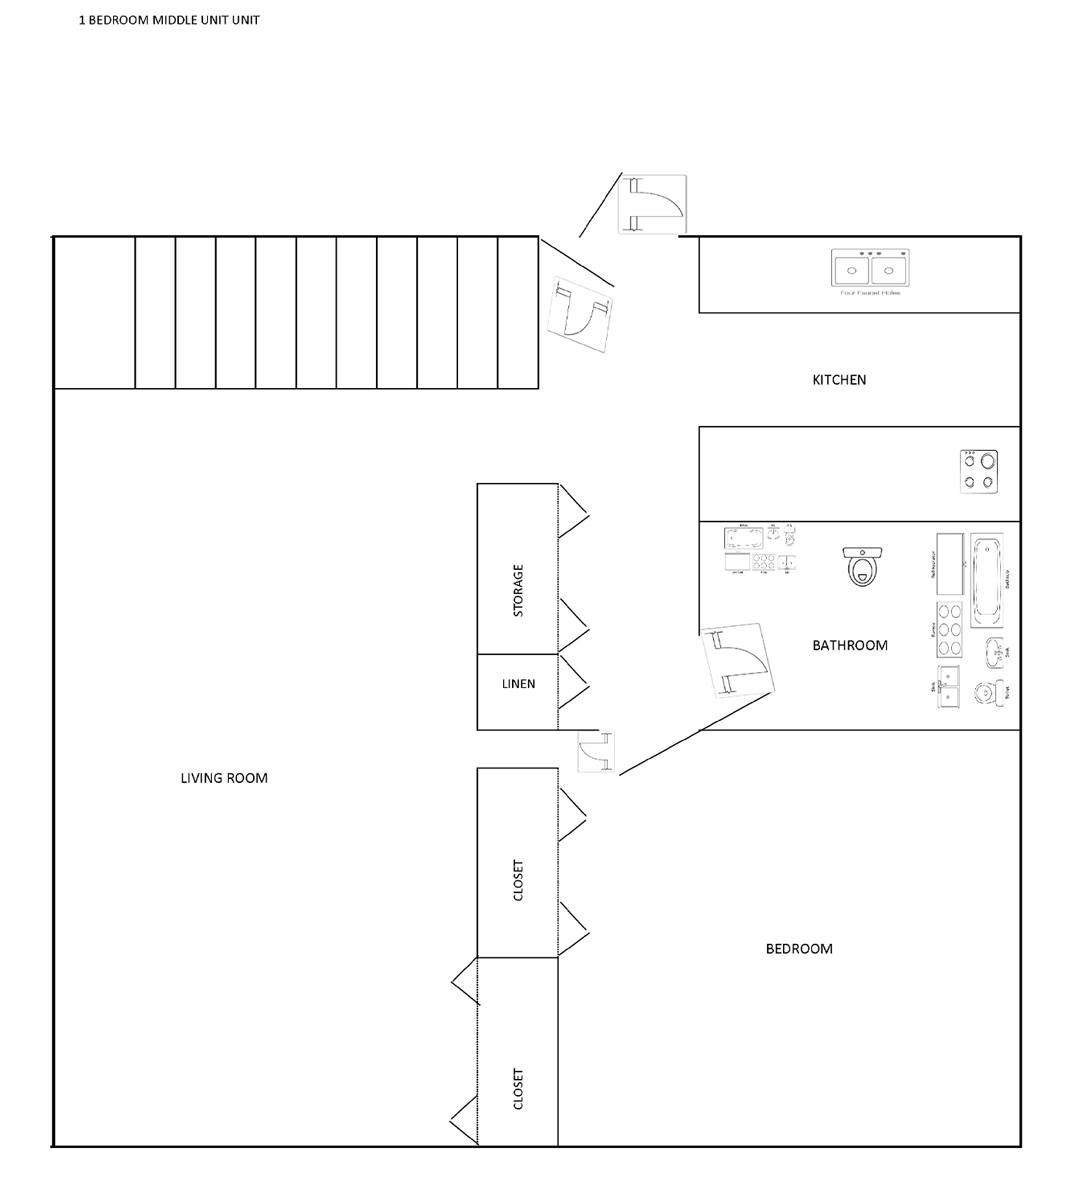 1 Bedroom - Middle Unit